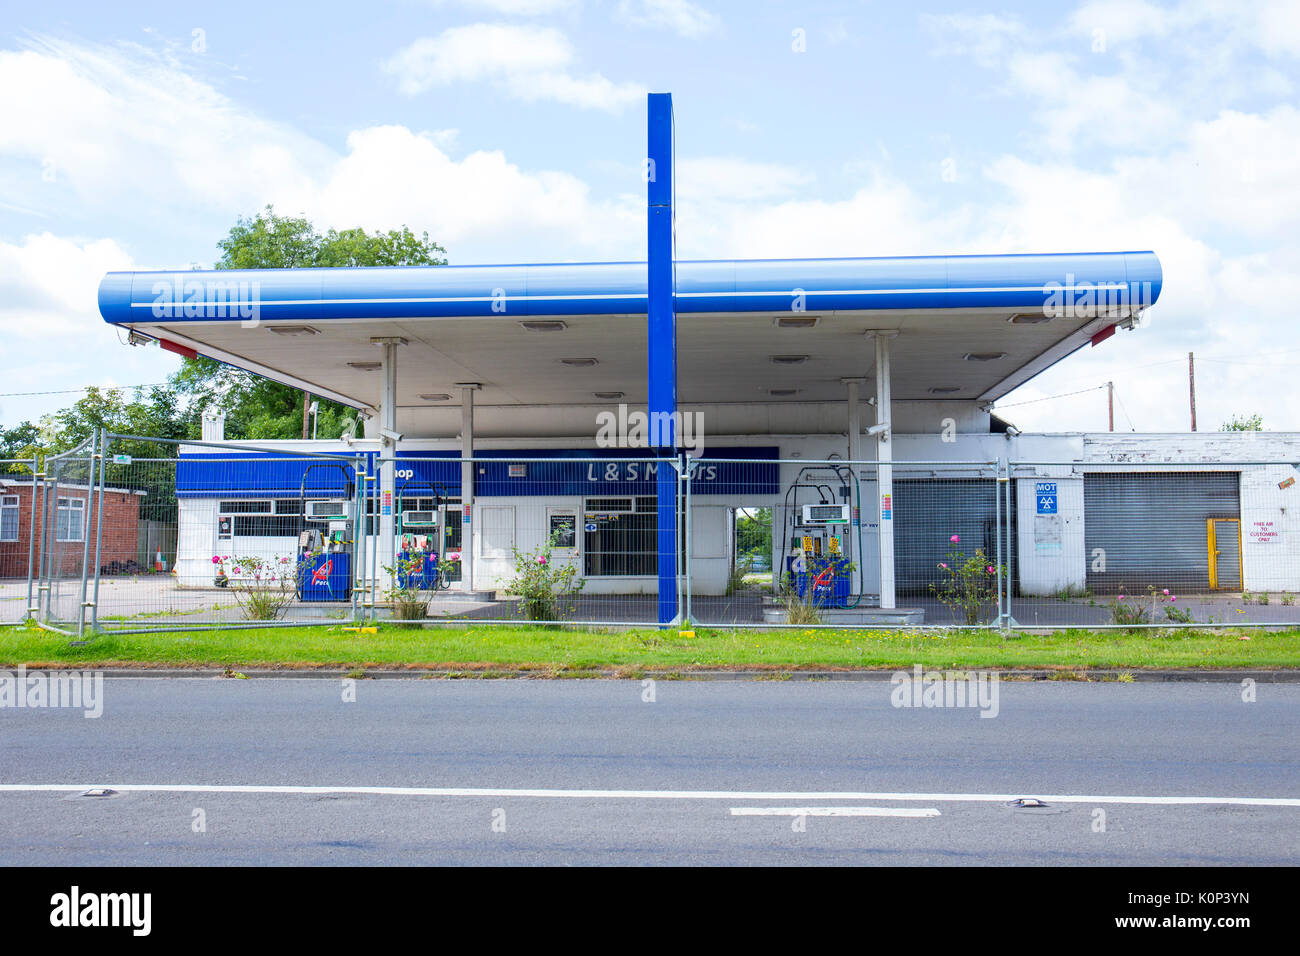 Closed down garage with petrol station in Cheshire UK Stock Photo